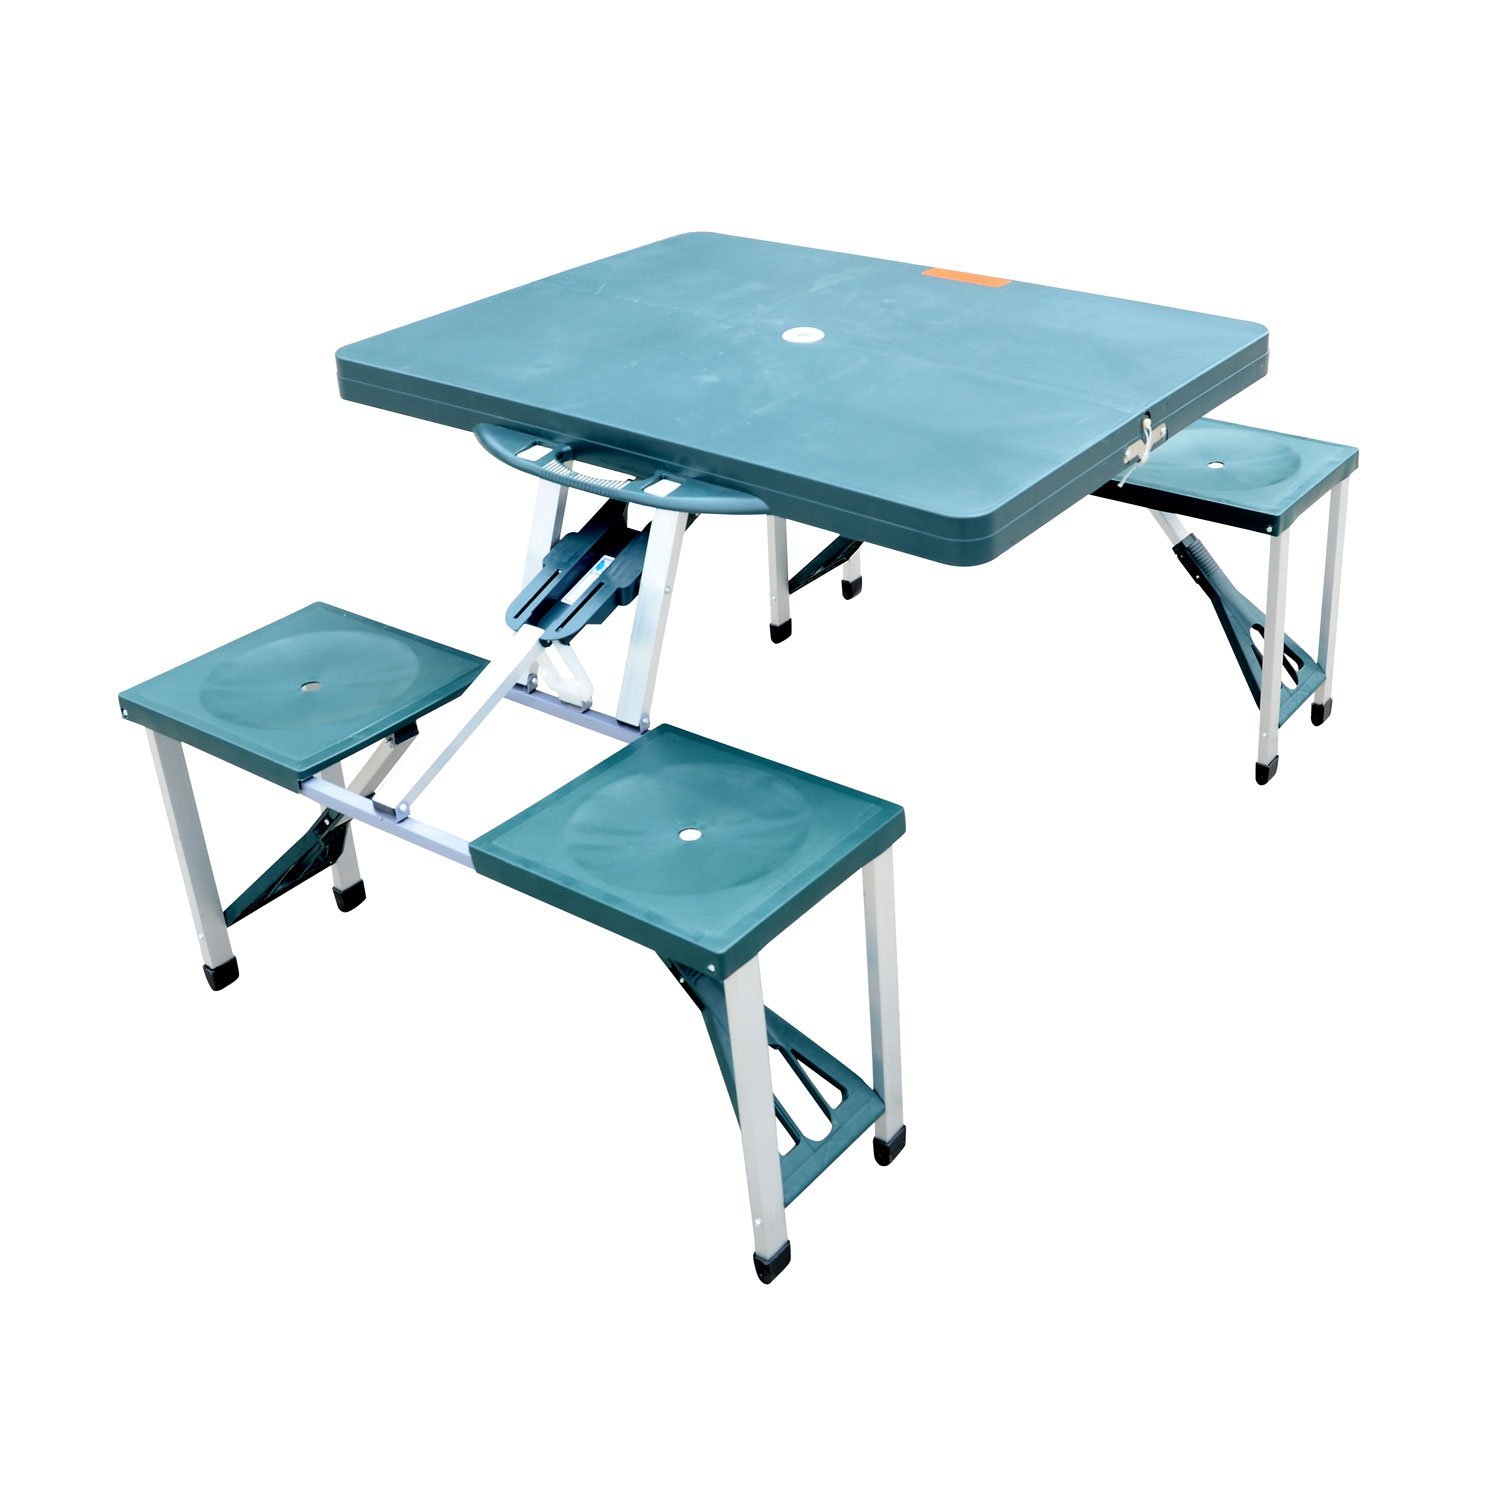 outsunny outdoor portable folding picnic table w/ seats - green ZMVQSWI